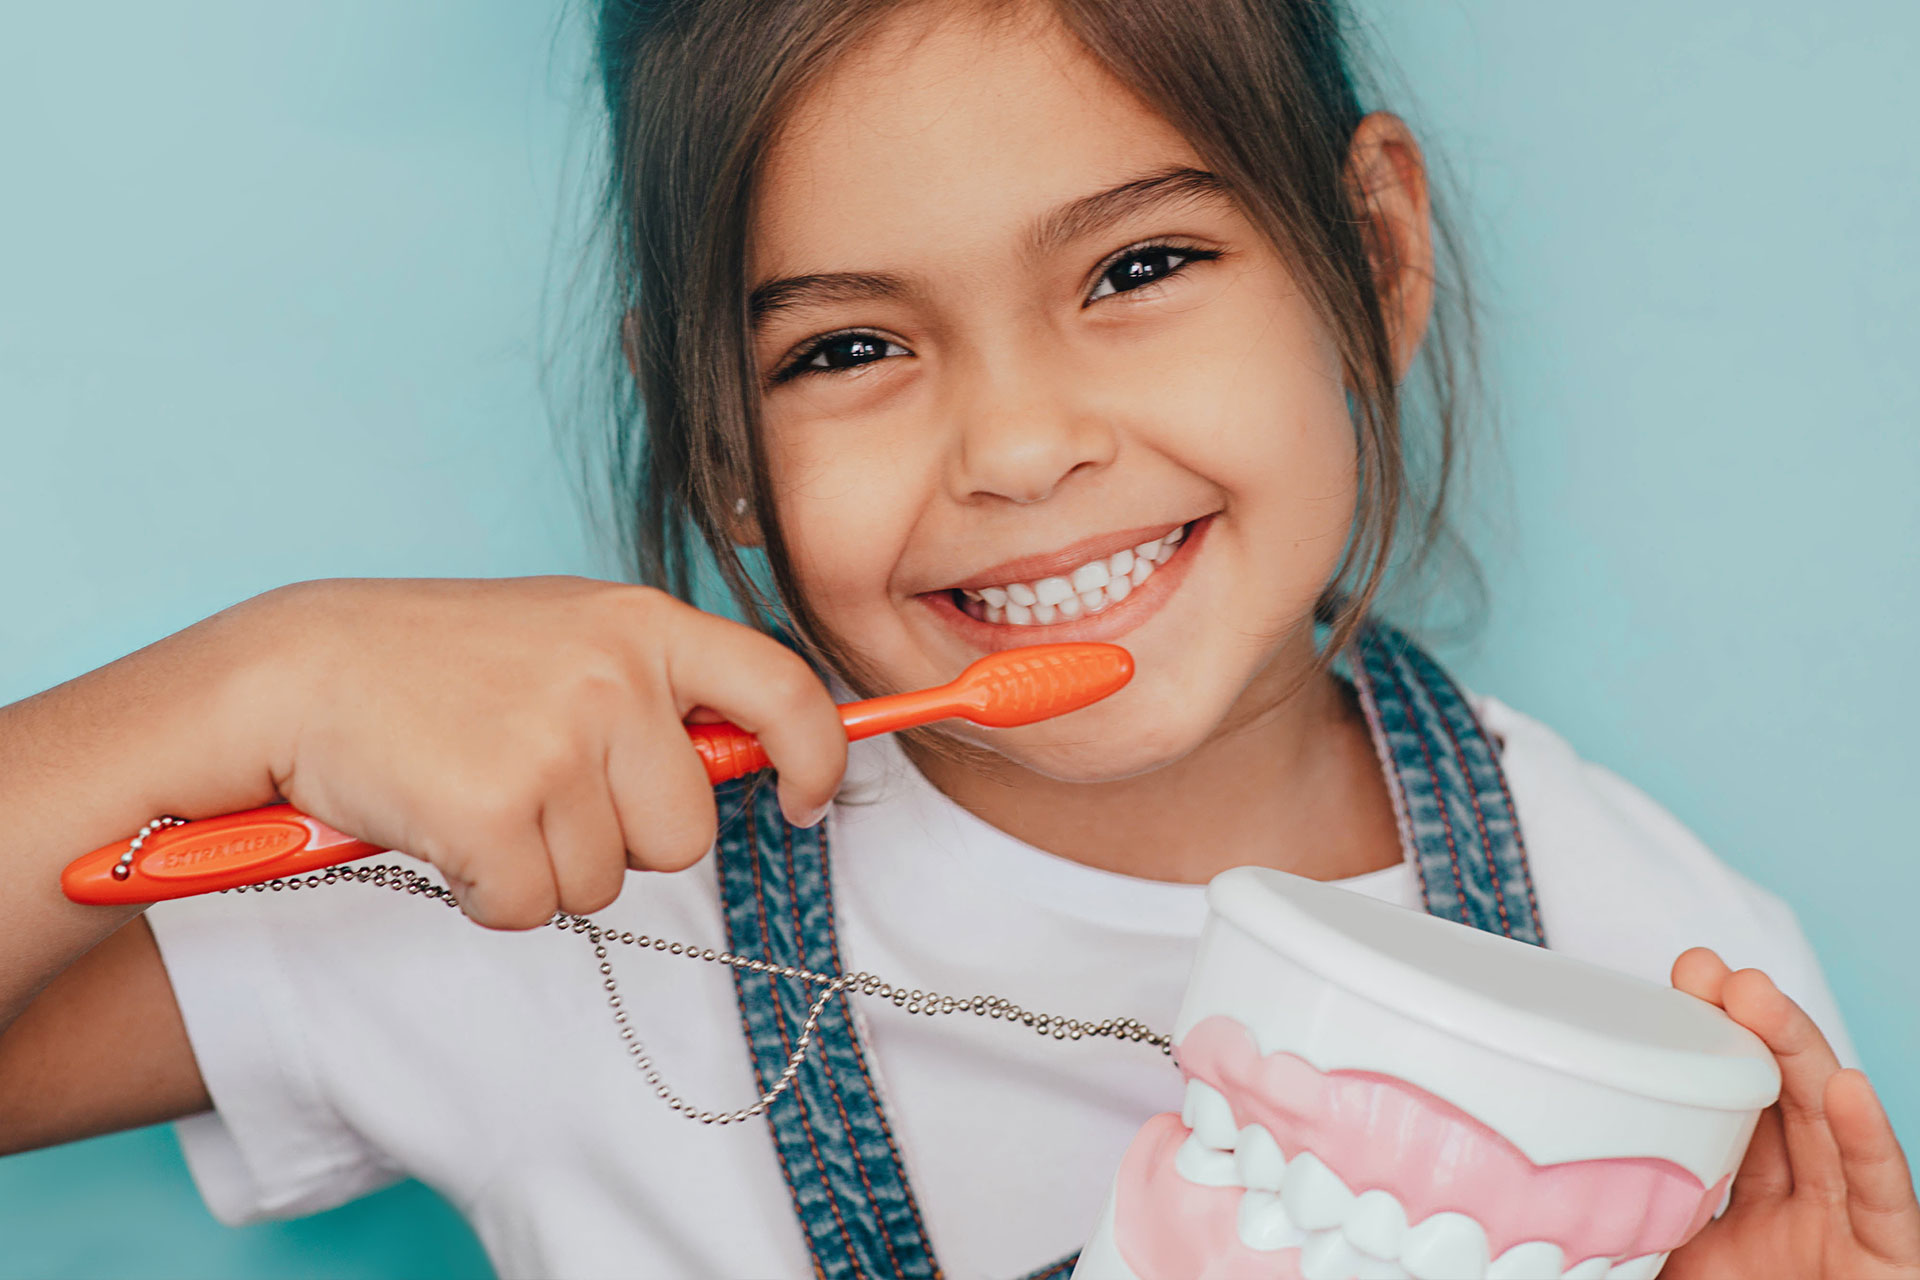 A young girl smiling while holding a pair of red scissors and showing her teeth.